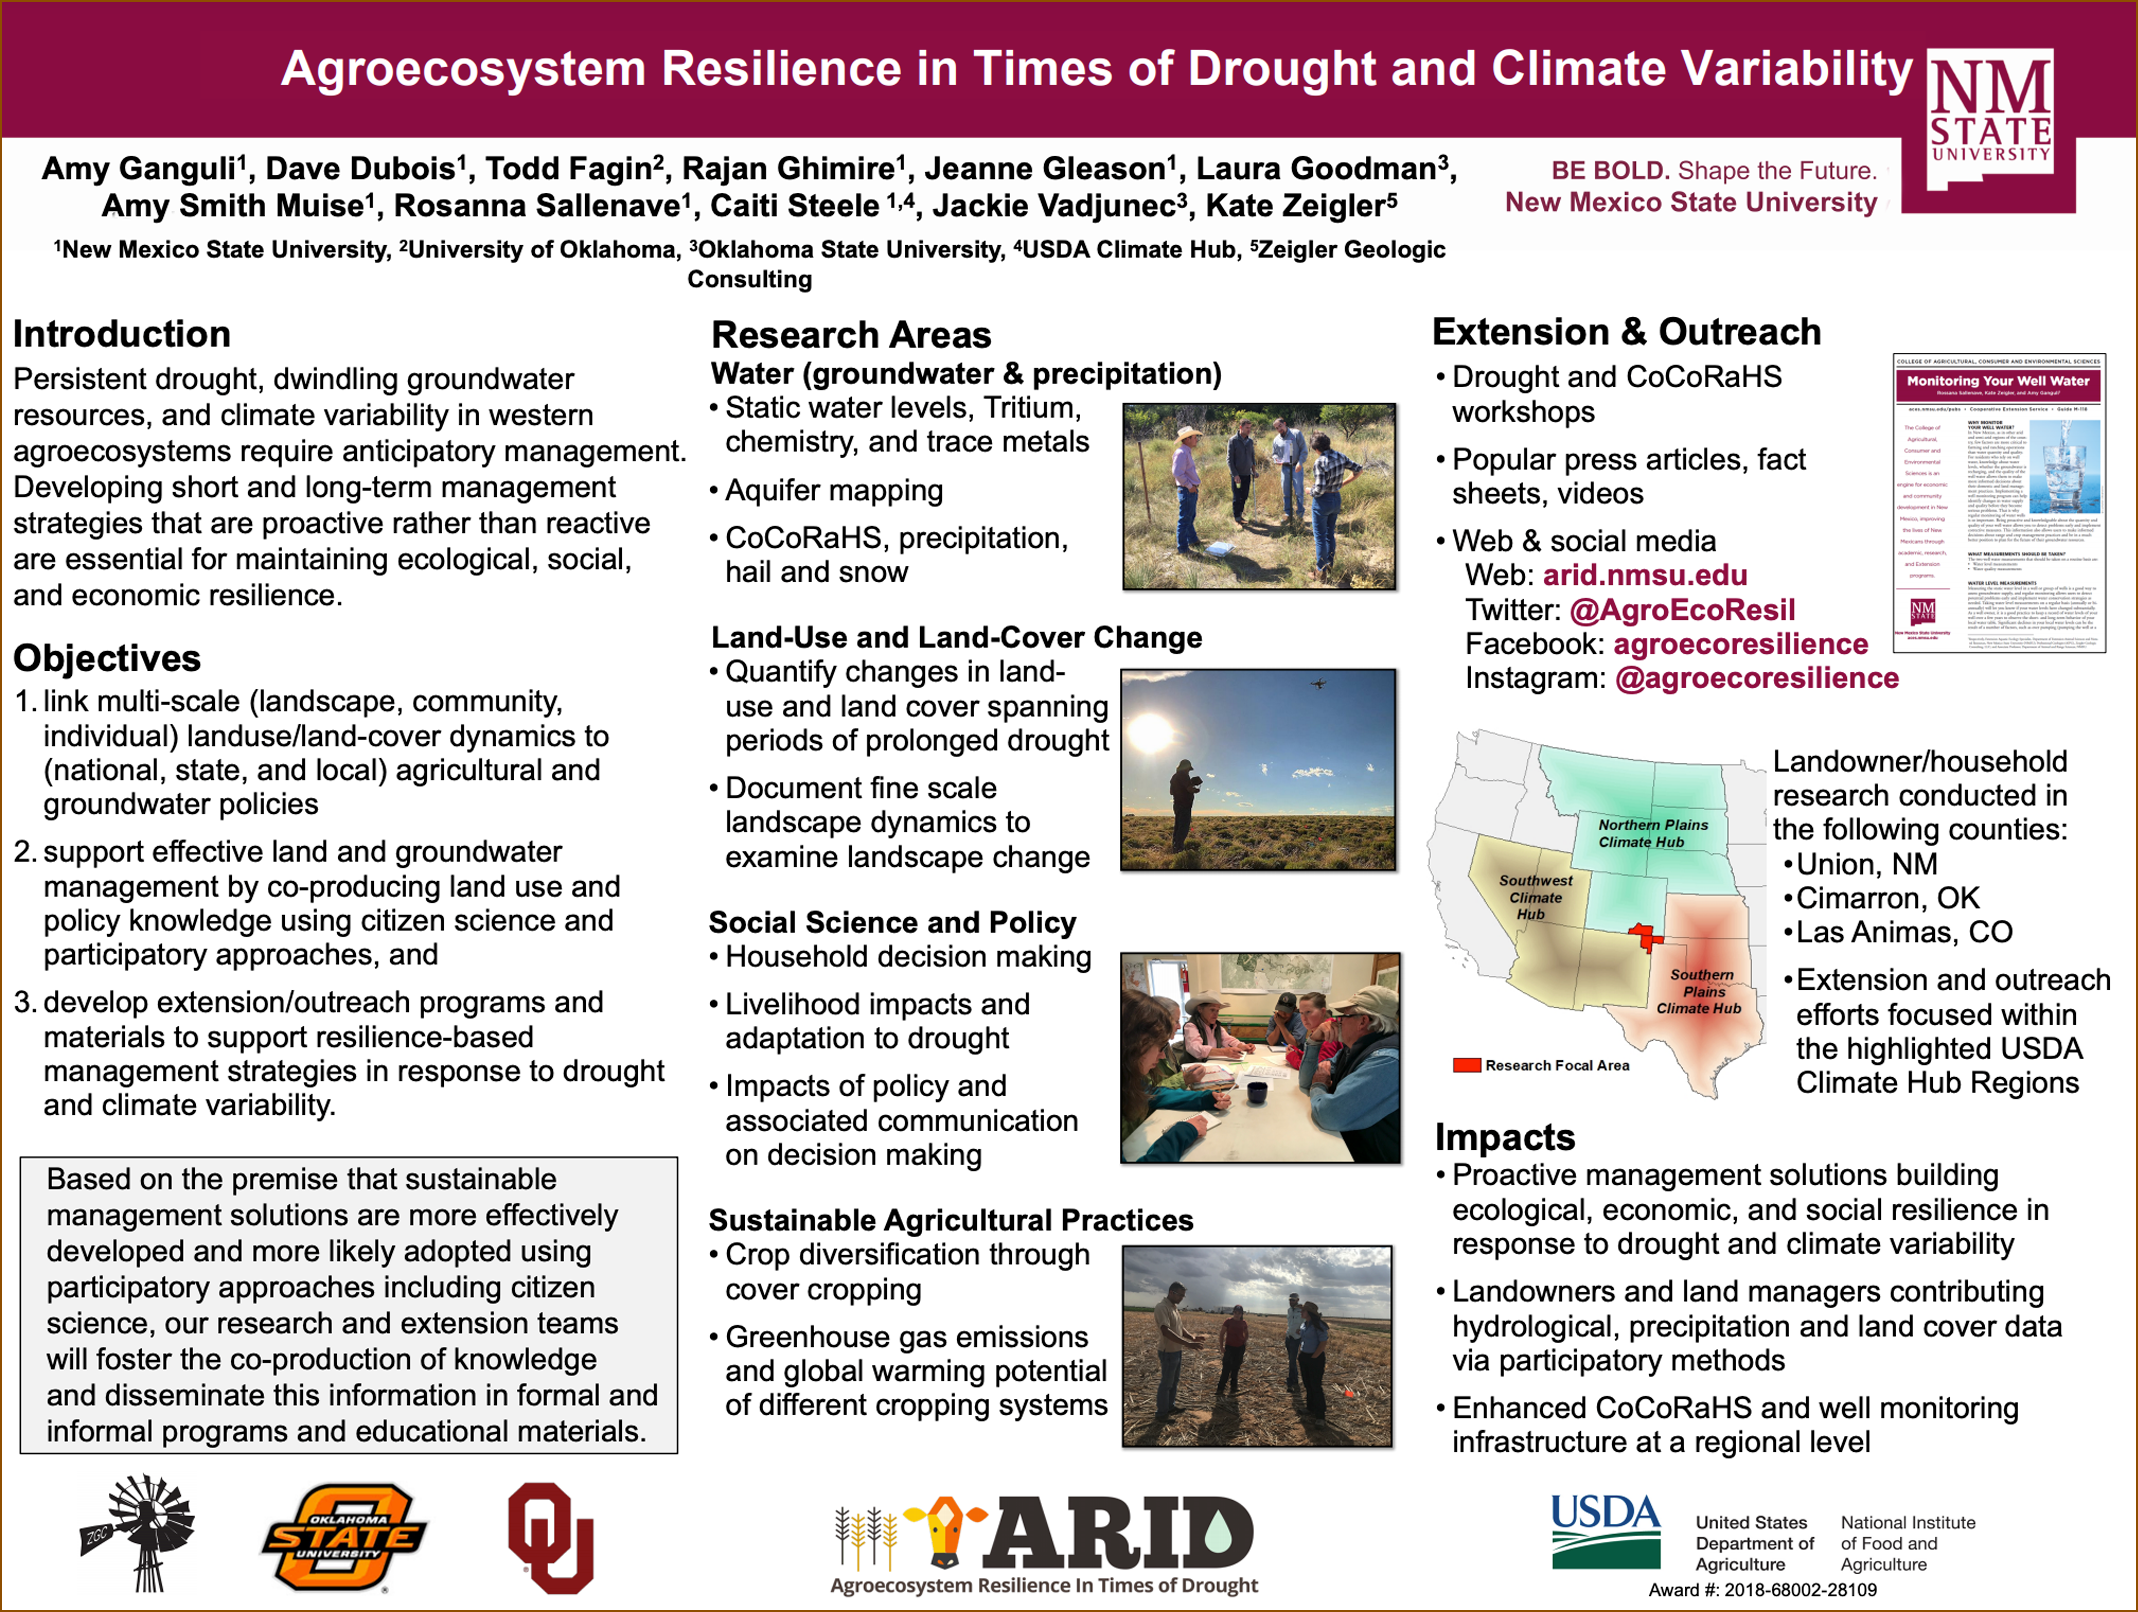 ARID - Agroecosystem Resilience in Times of Drought